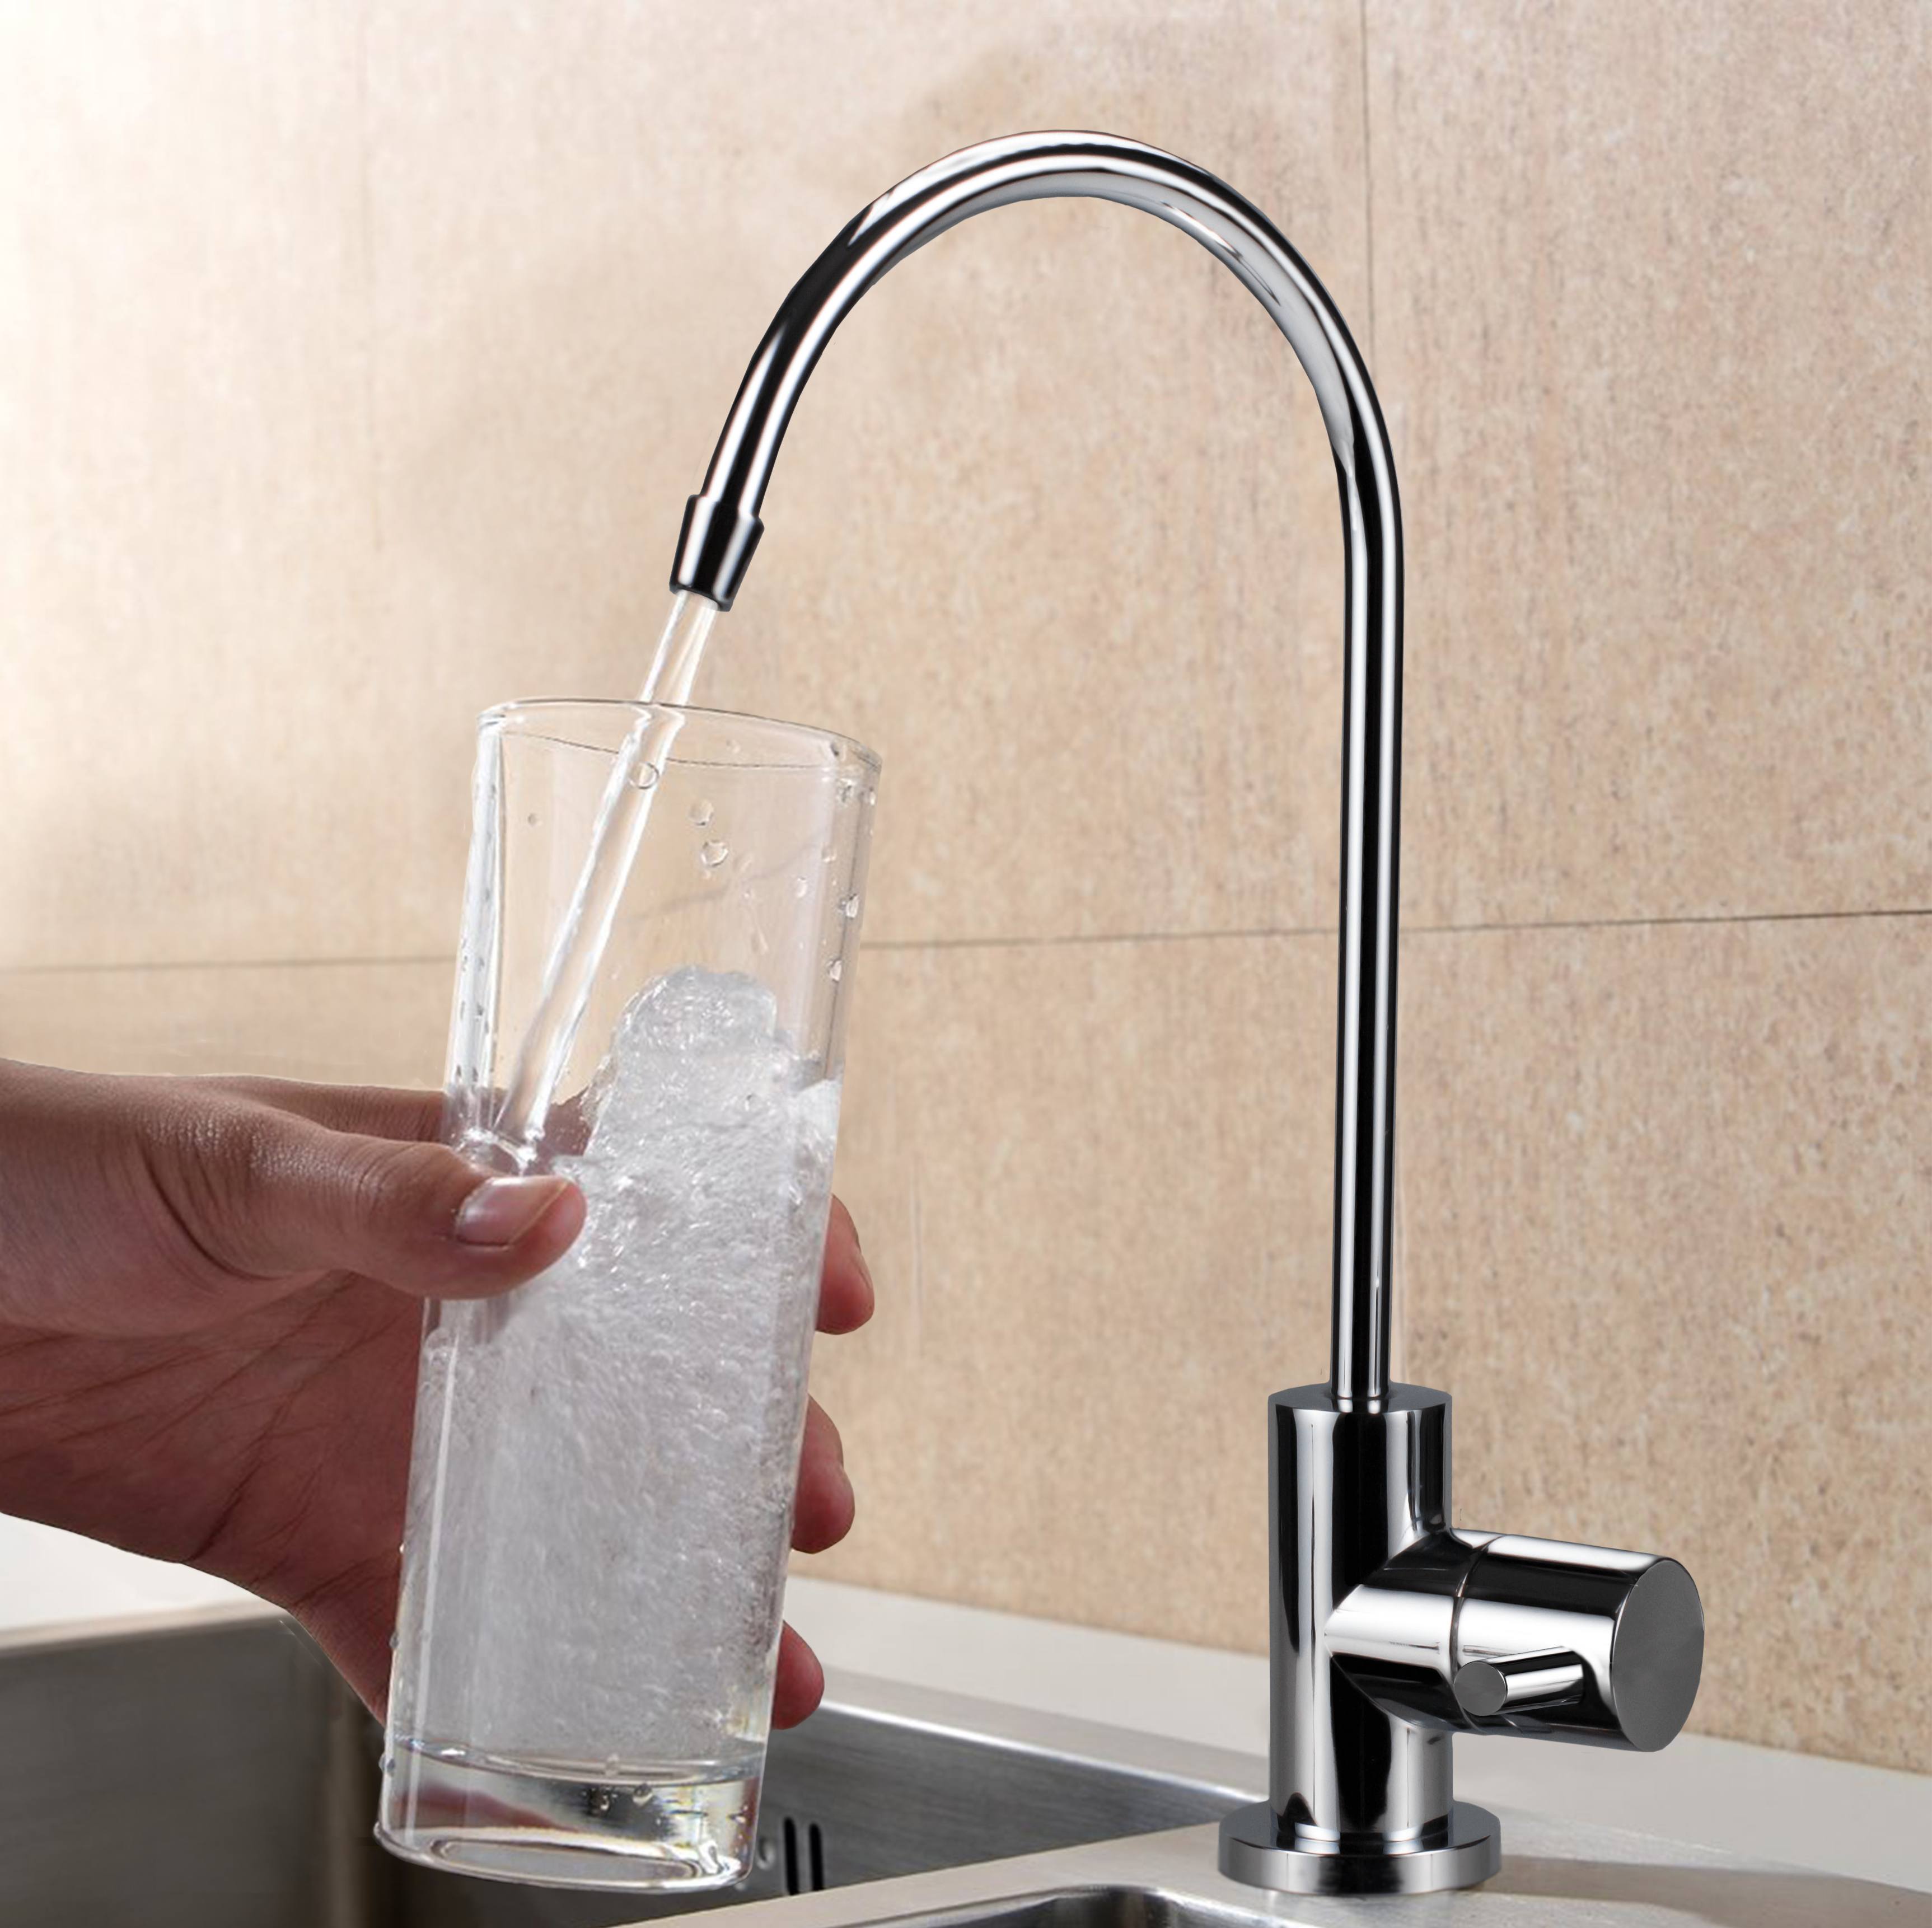 Reverse Osmosis Water Filter NU Aqua Platinum Series 5 Stage 100GPD RO System - faucet filling glass of water